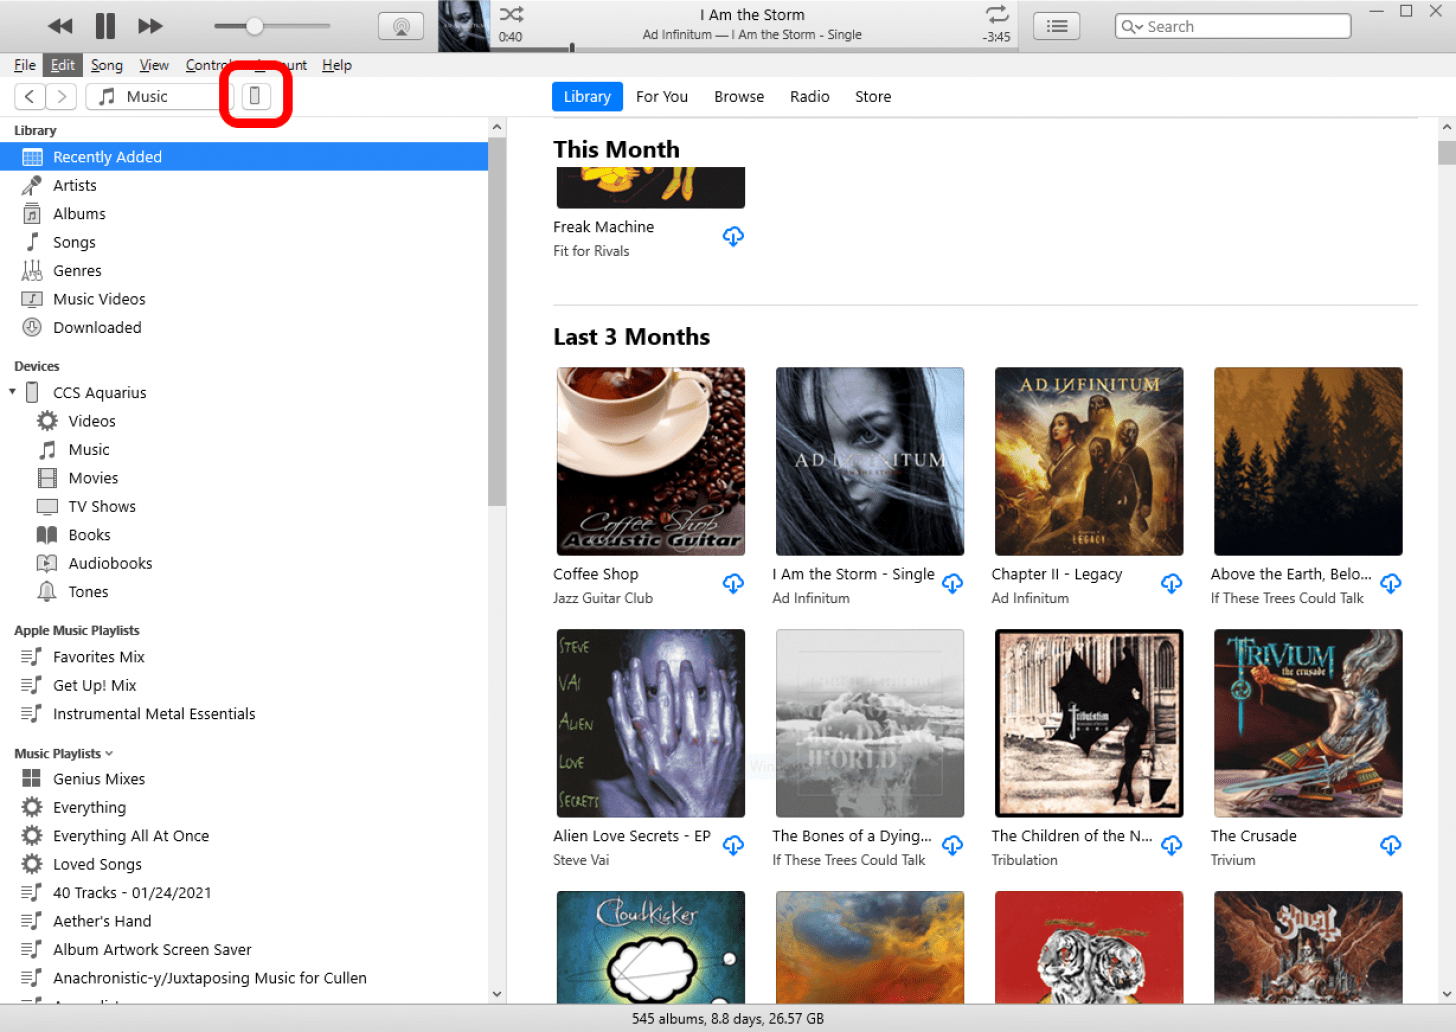 The iTunes main screen with the icon for a connect iPhone marked in the upper left.